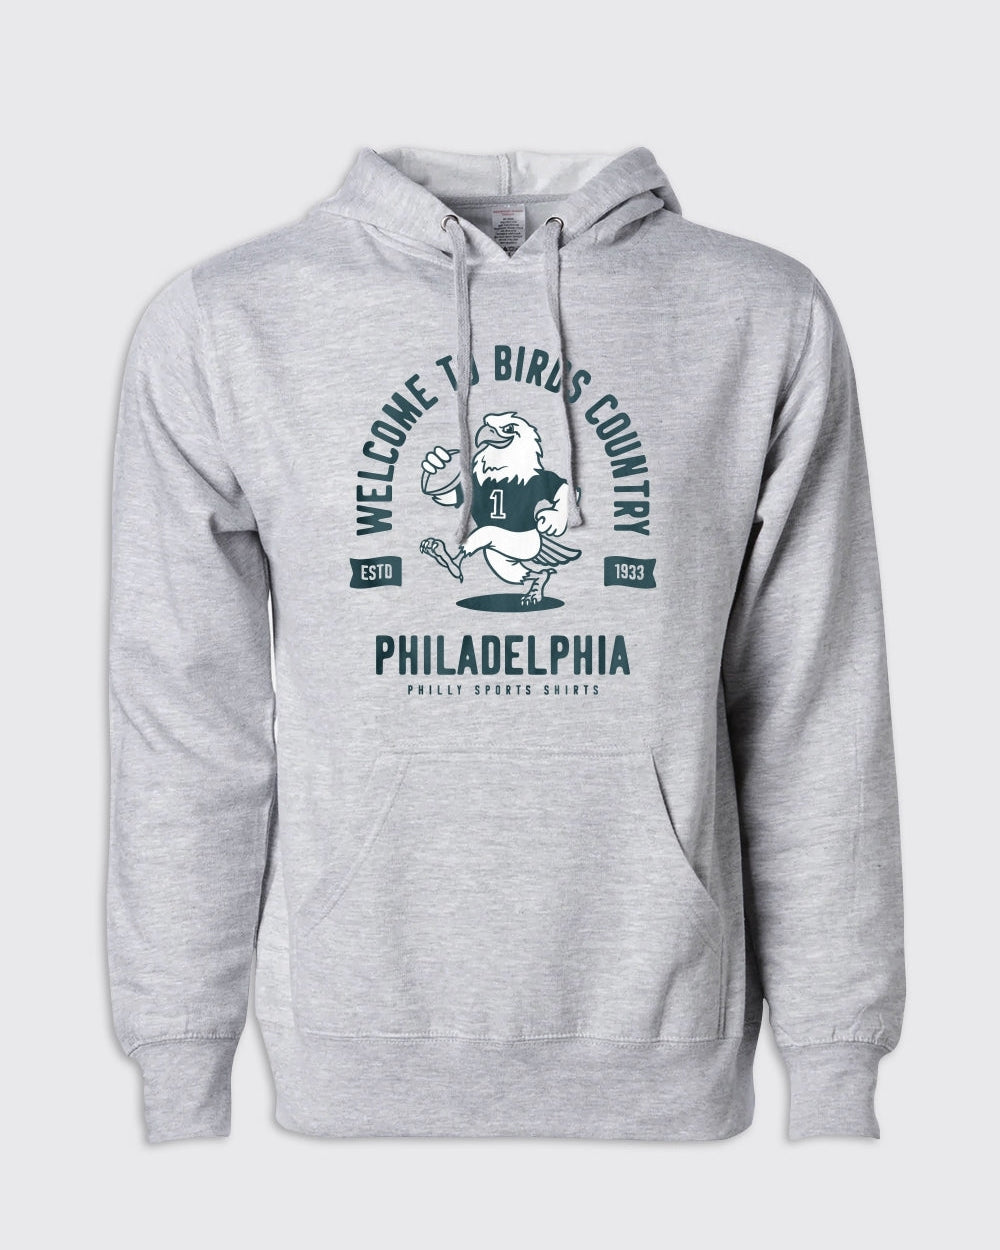 Welcome To Birds Country Hoodie - Eagles, Hoodies - Philly Sports Shirts